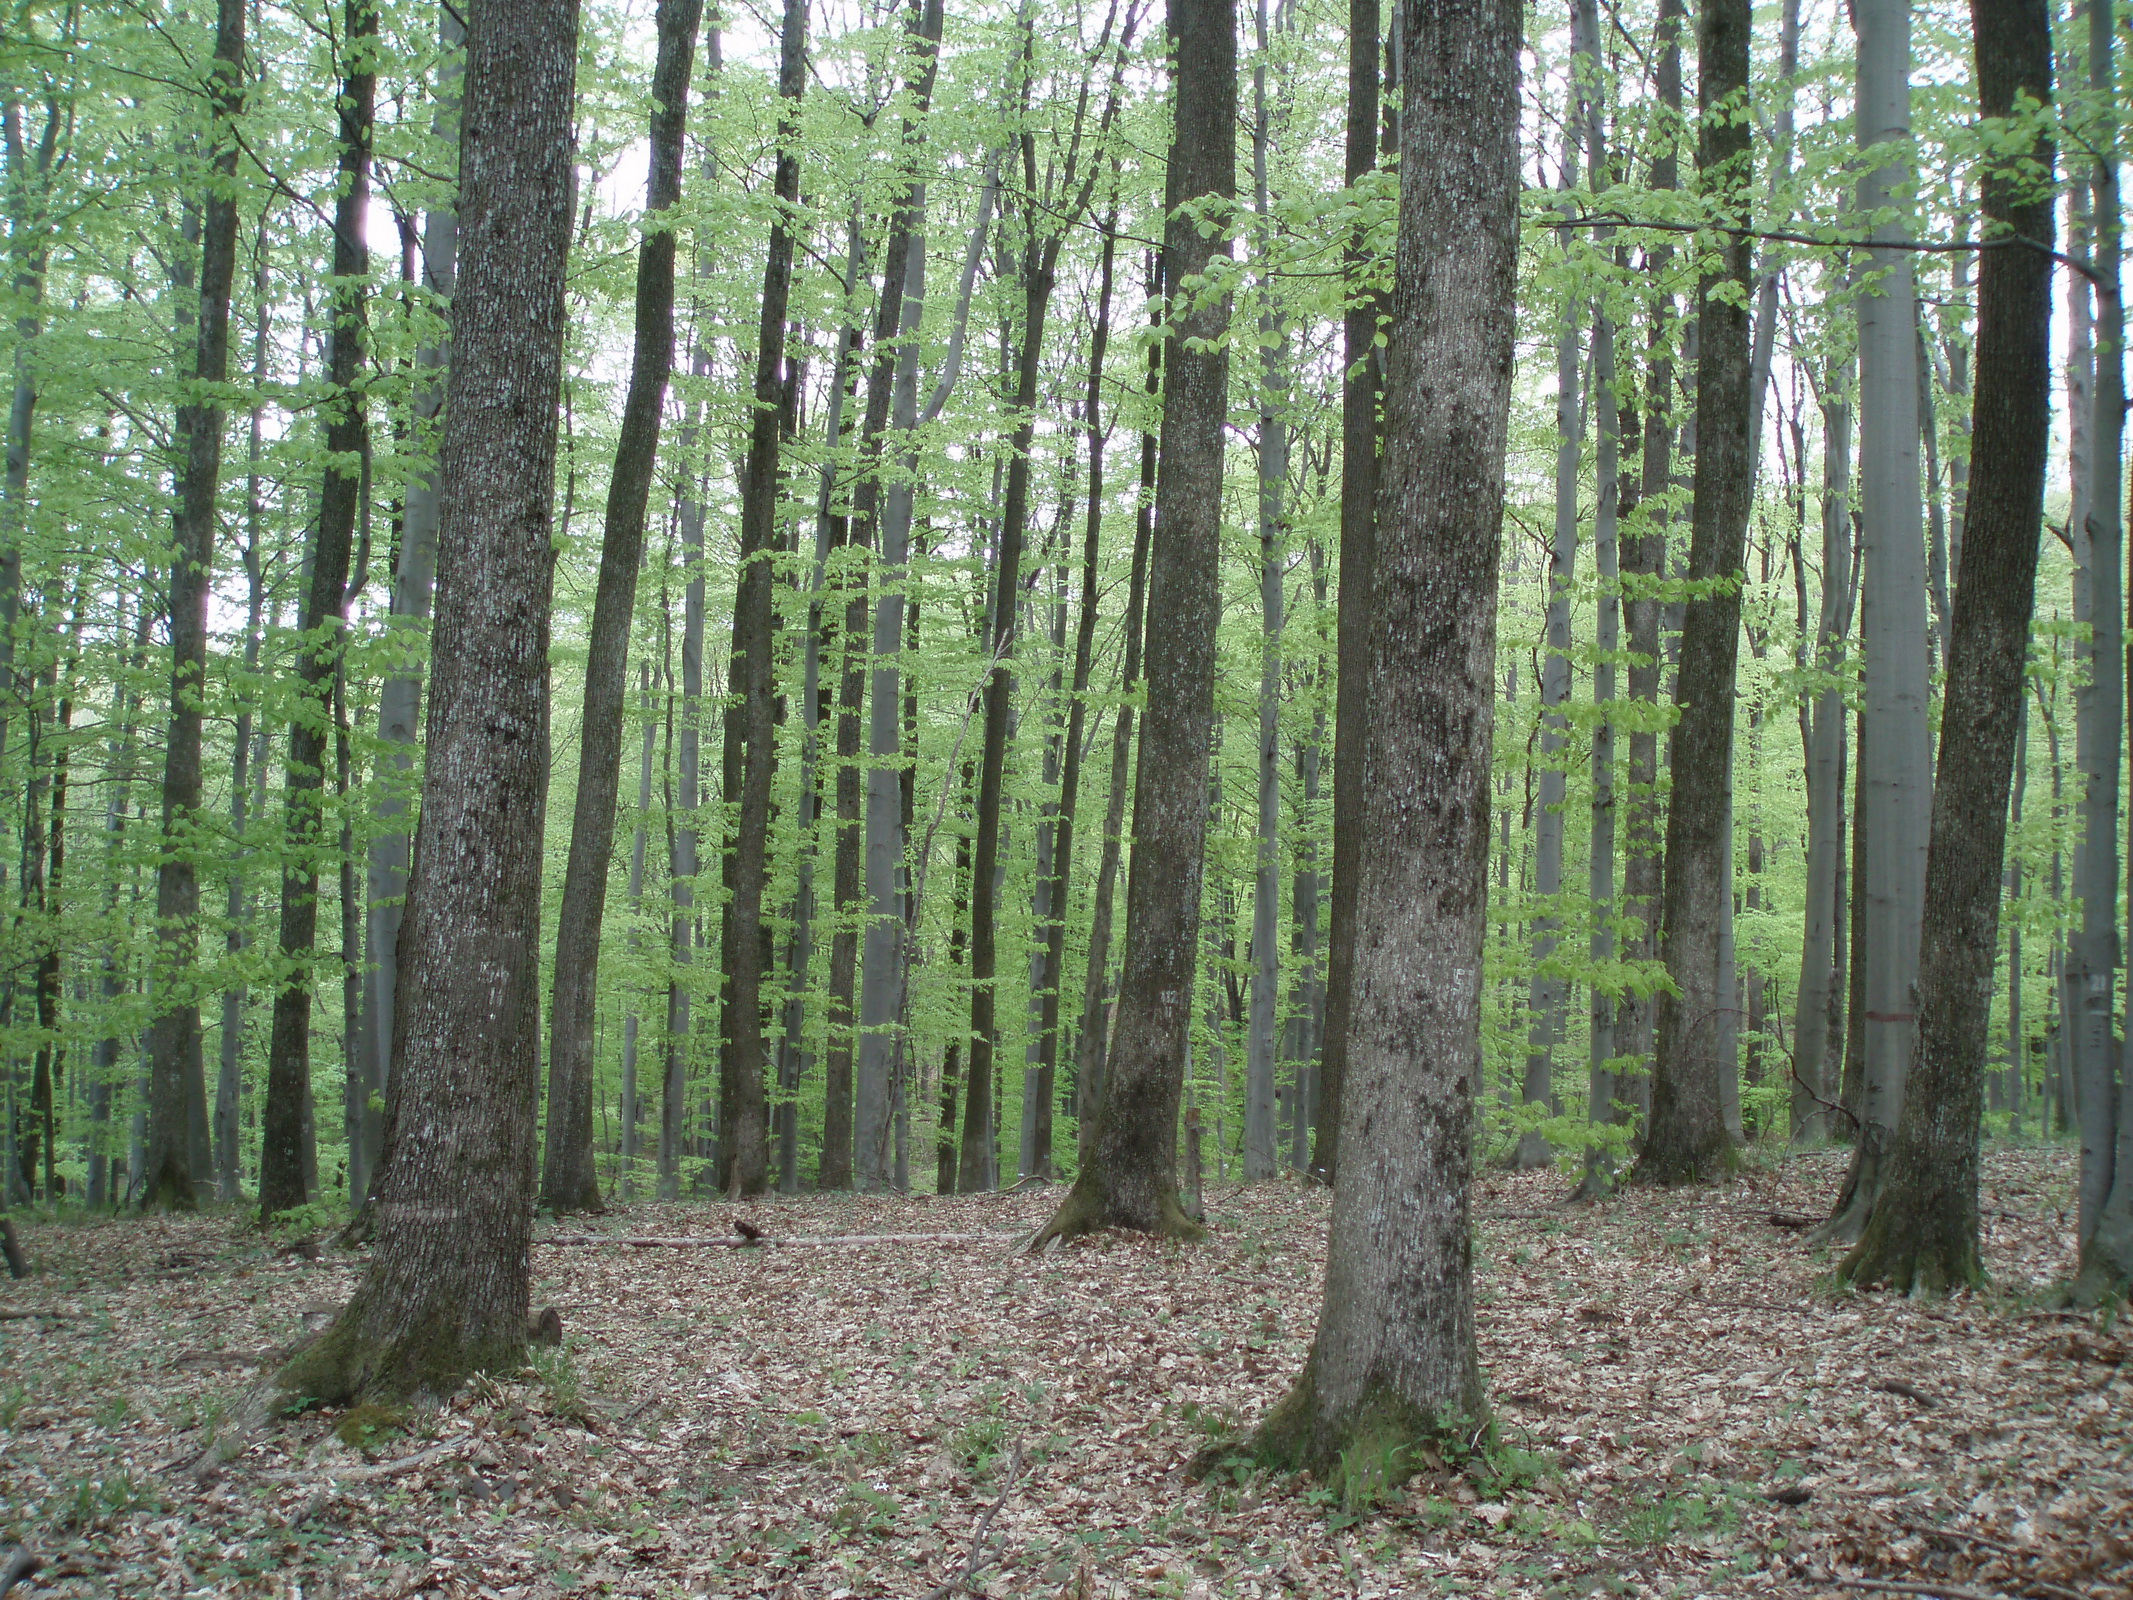 Kalnik forest, 40-years old experimental plot in the Sessile oak-Beech stand, structured using the original thinning method (C) Anic